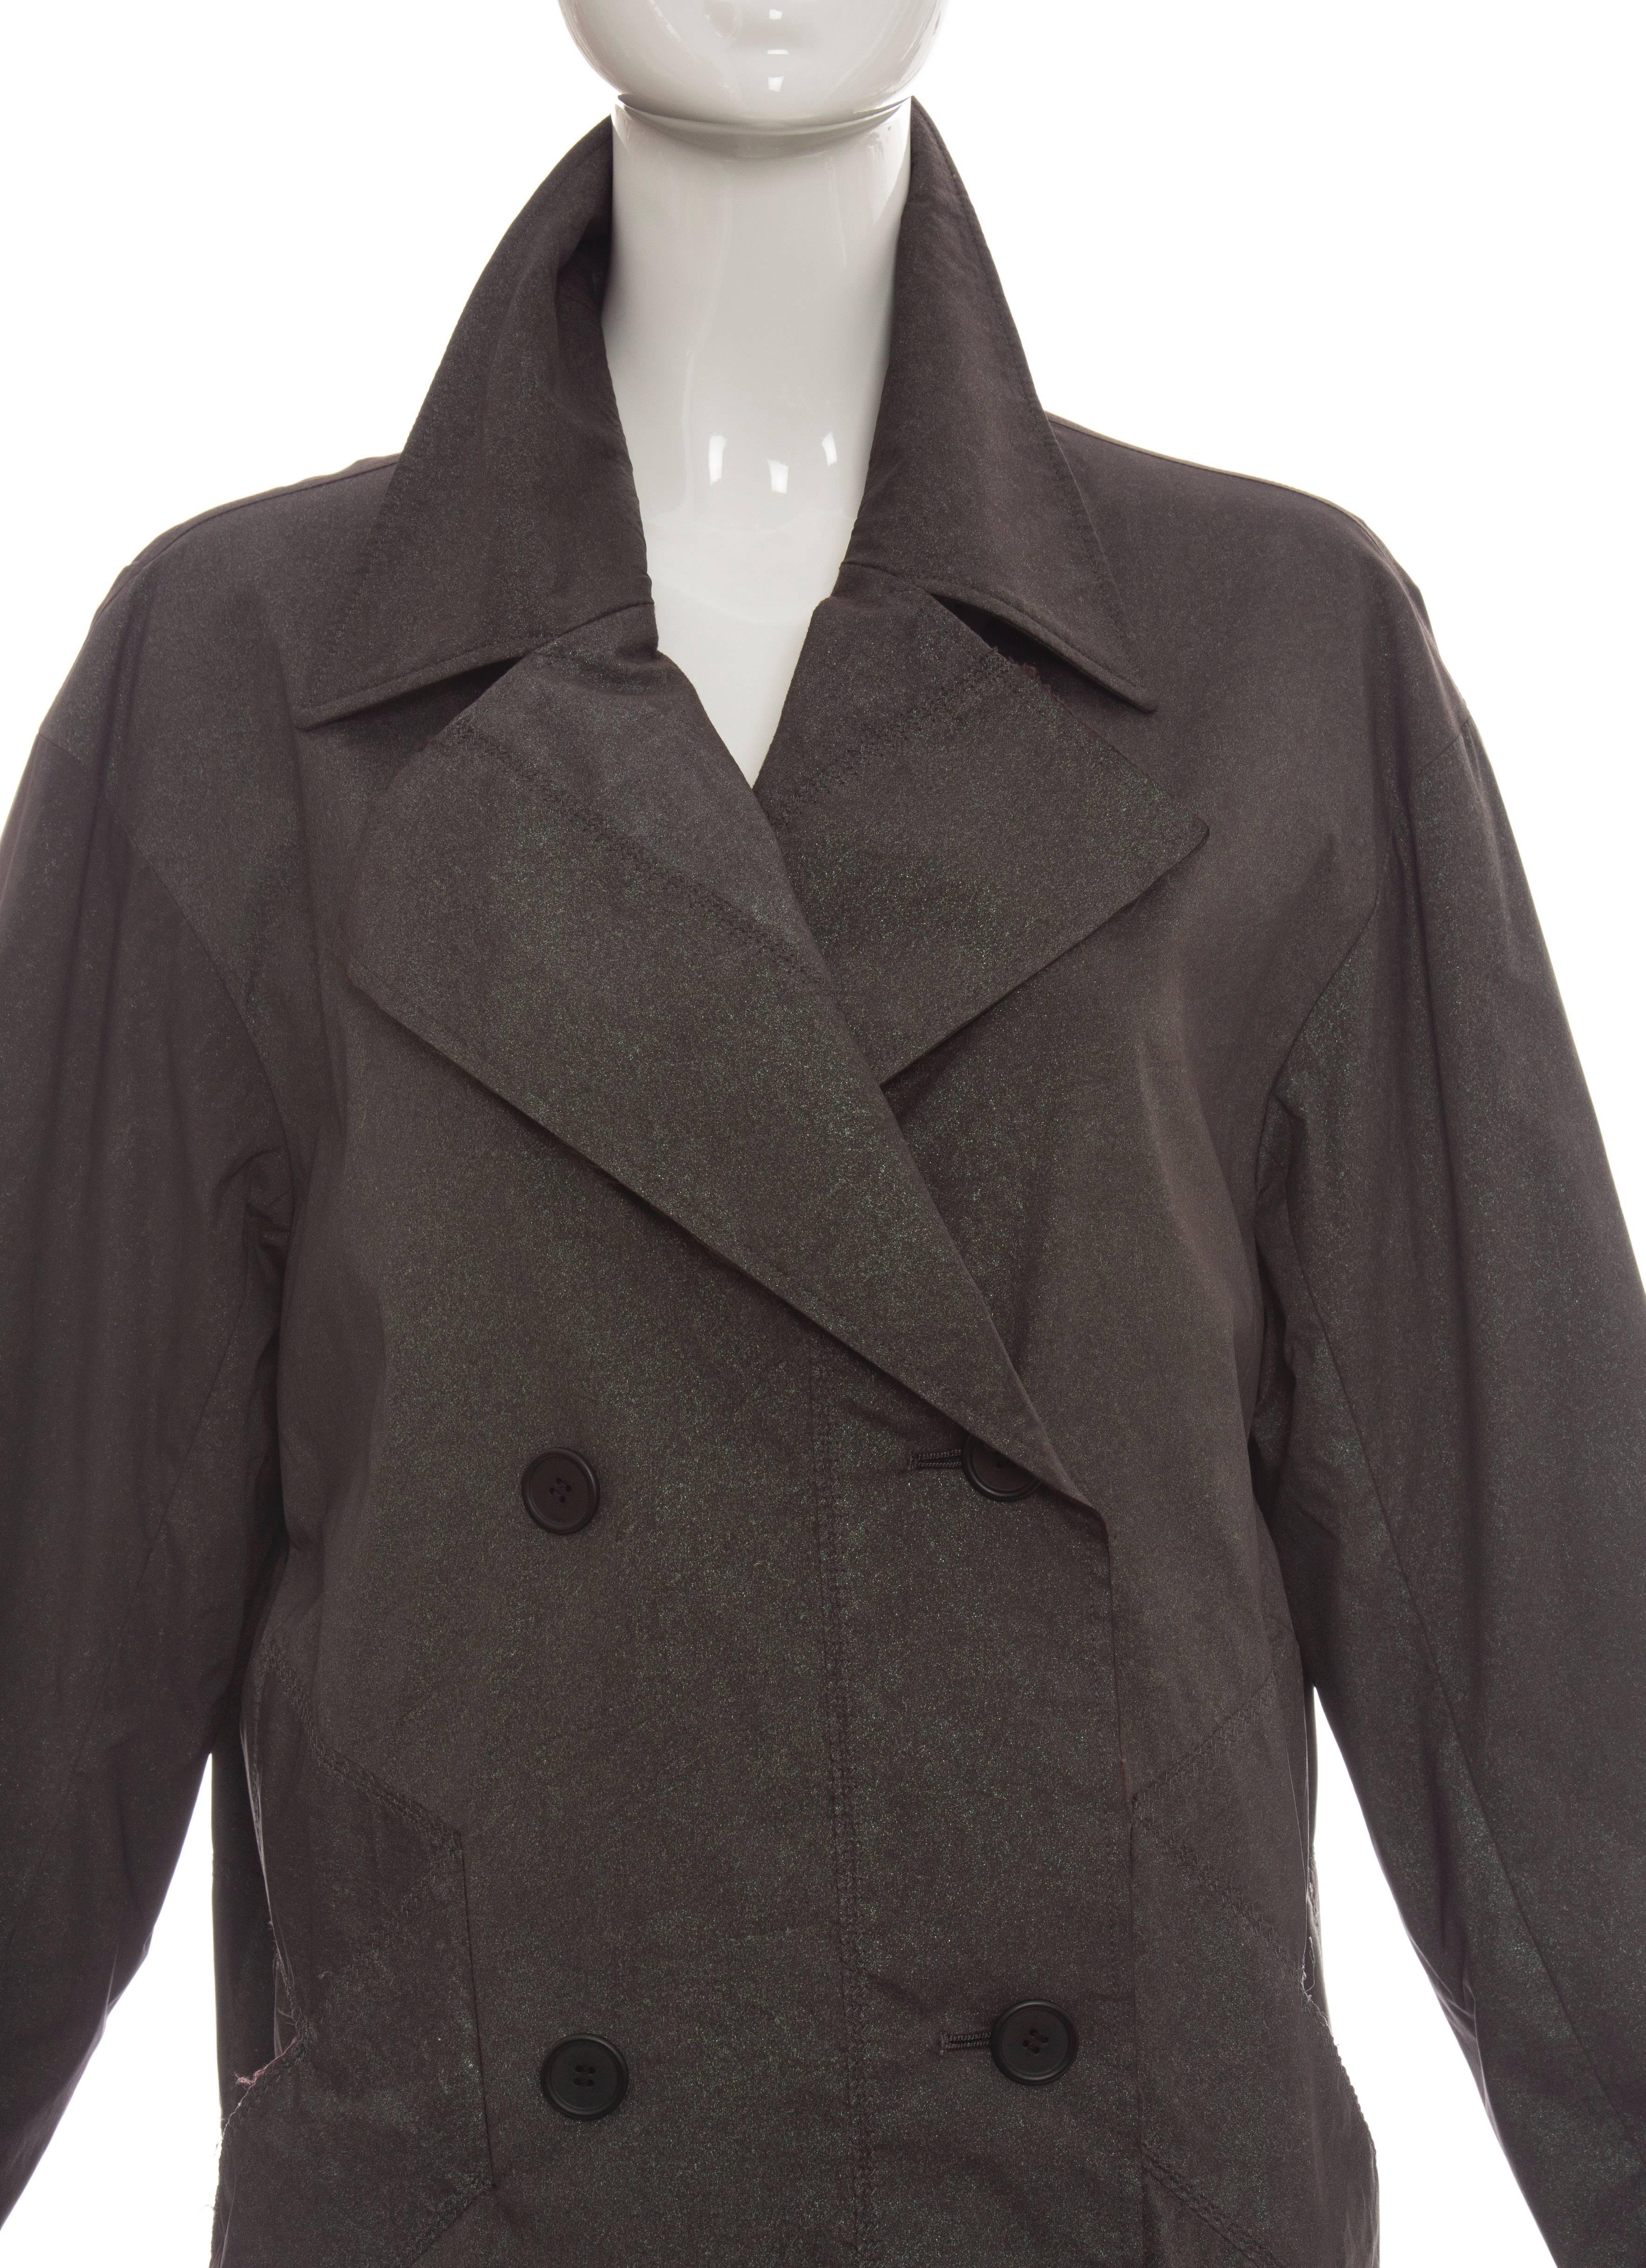 Women's Issey Miyake Grey Double Breasted Trench Coat, Circa 1990's For Sale